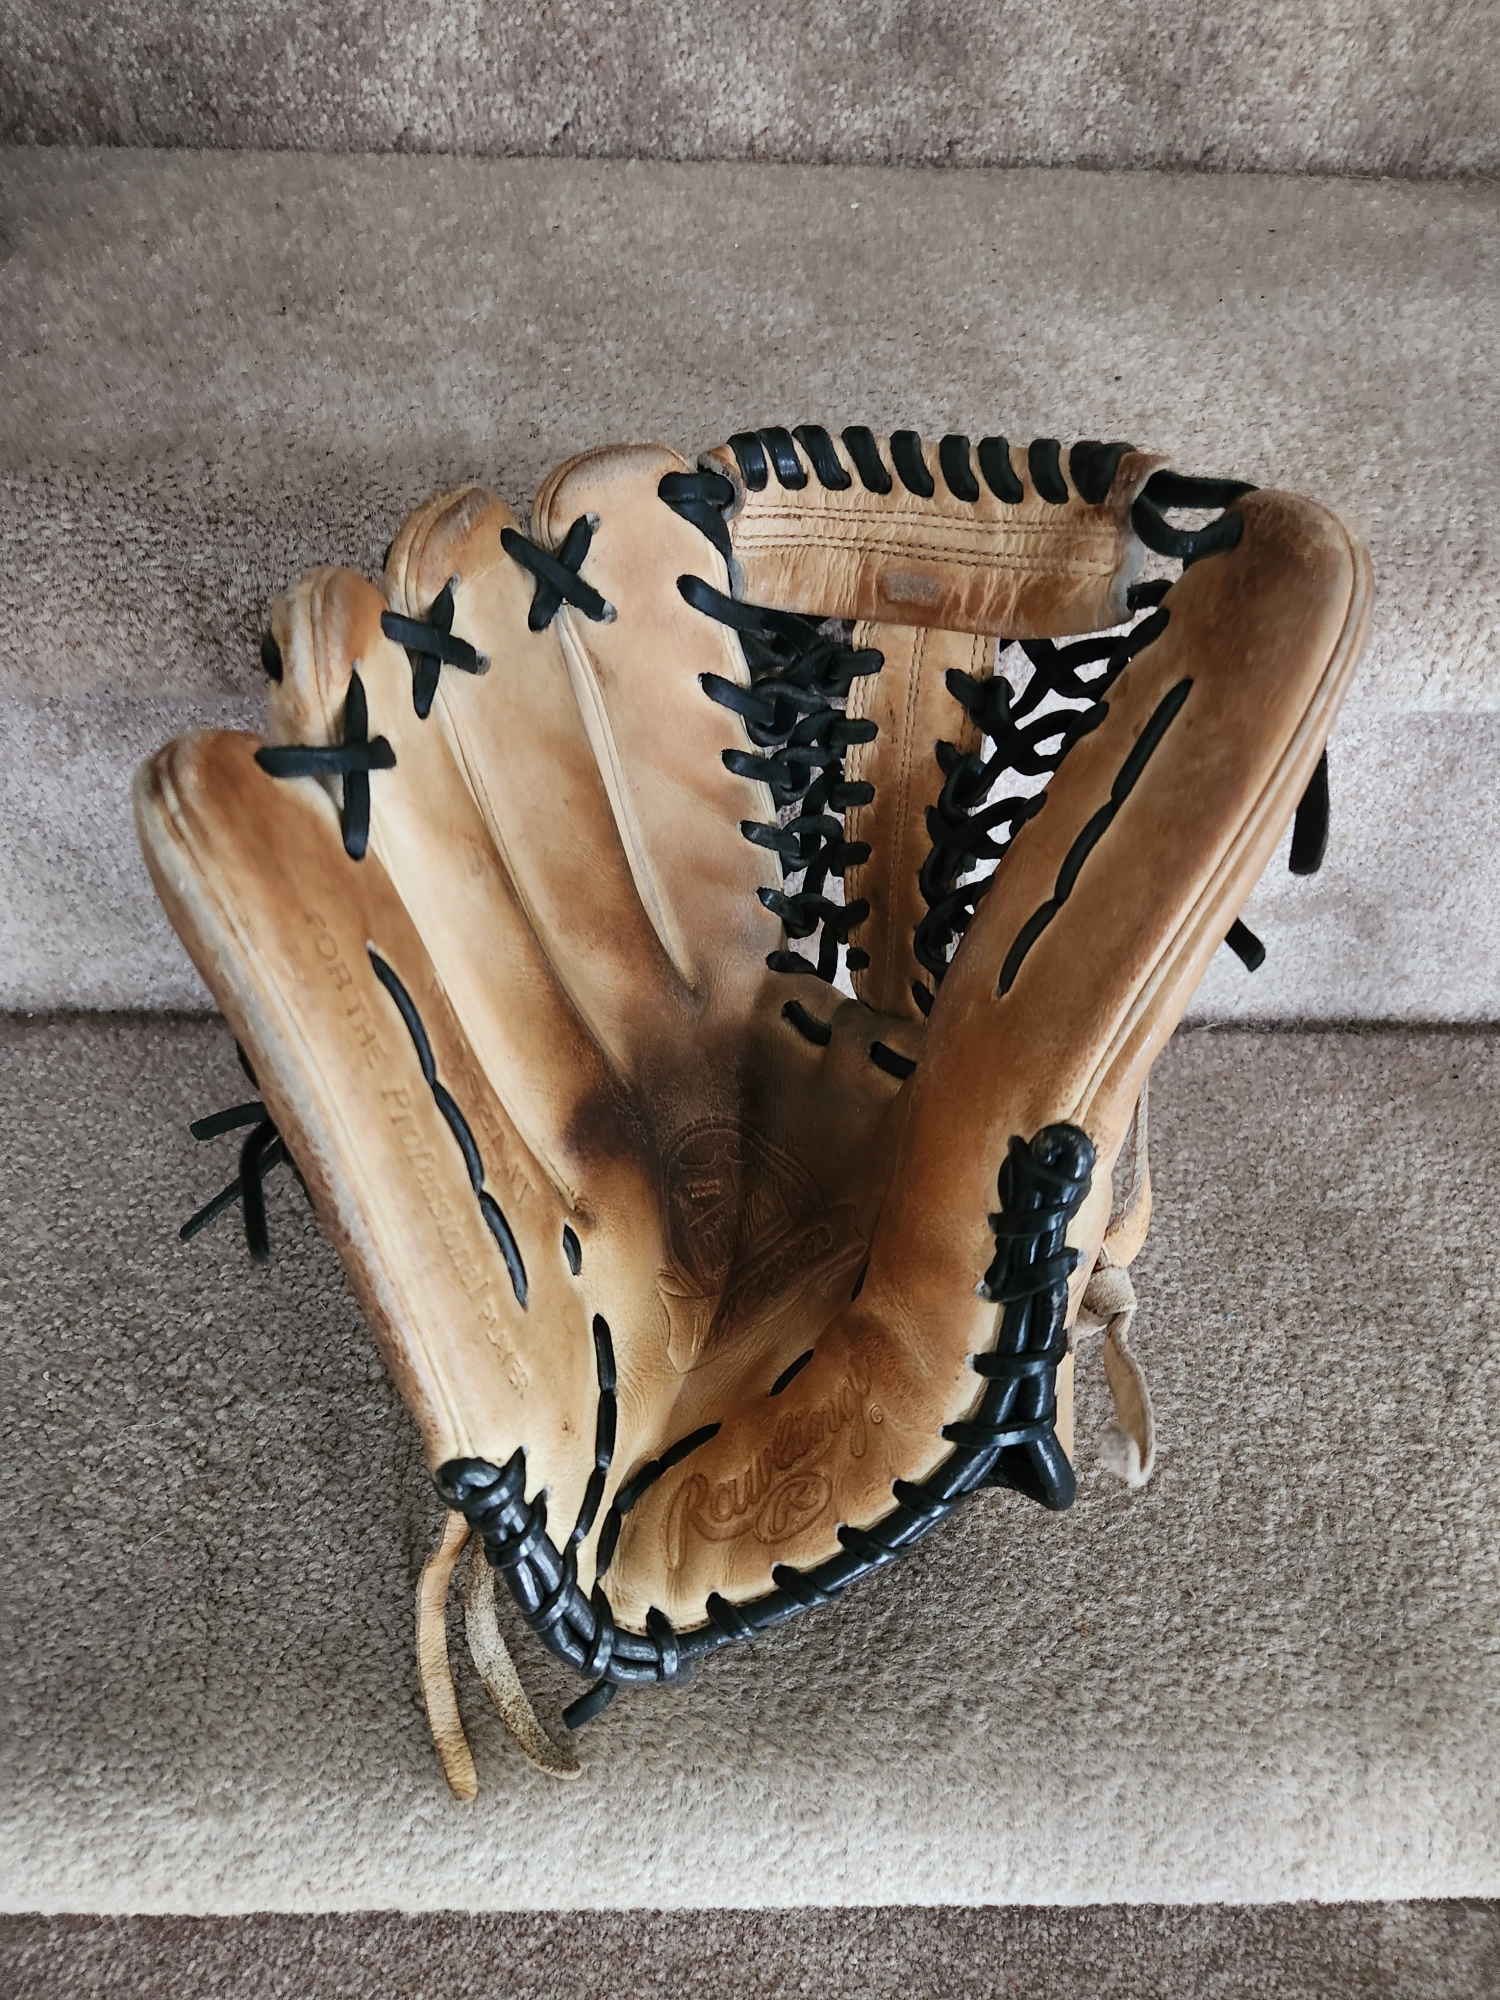 Rawlings Left Hand Throw Outfield Pro Preferred Baseball Glove 12.75"